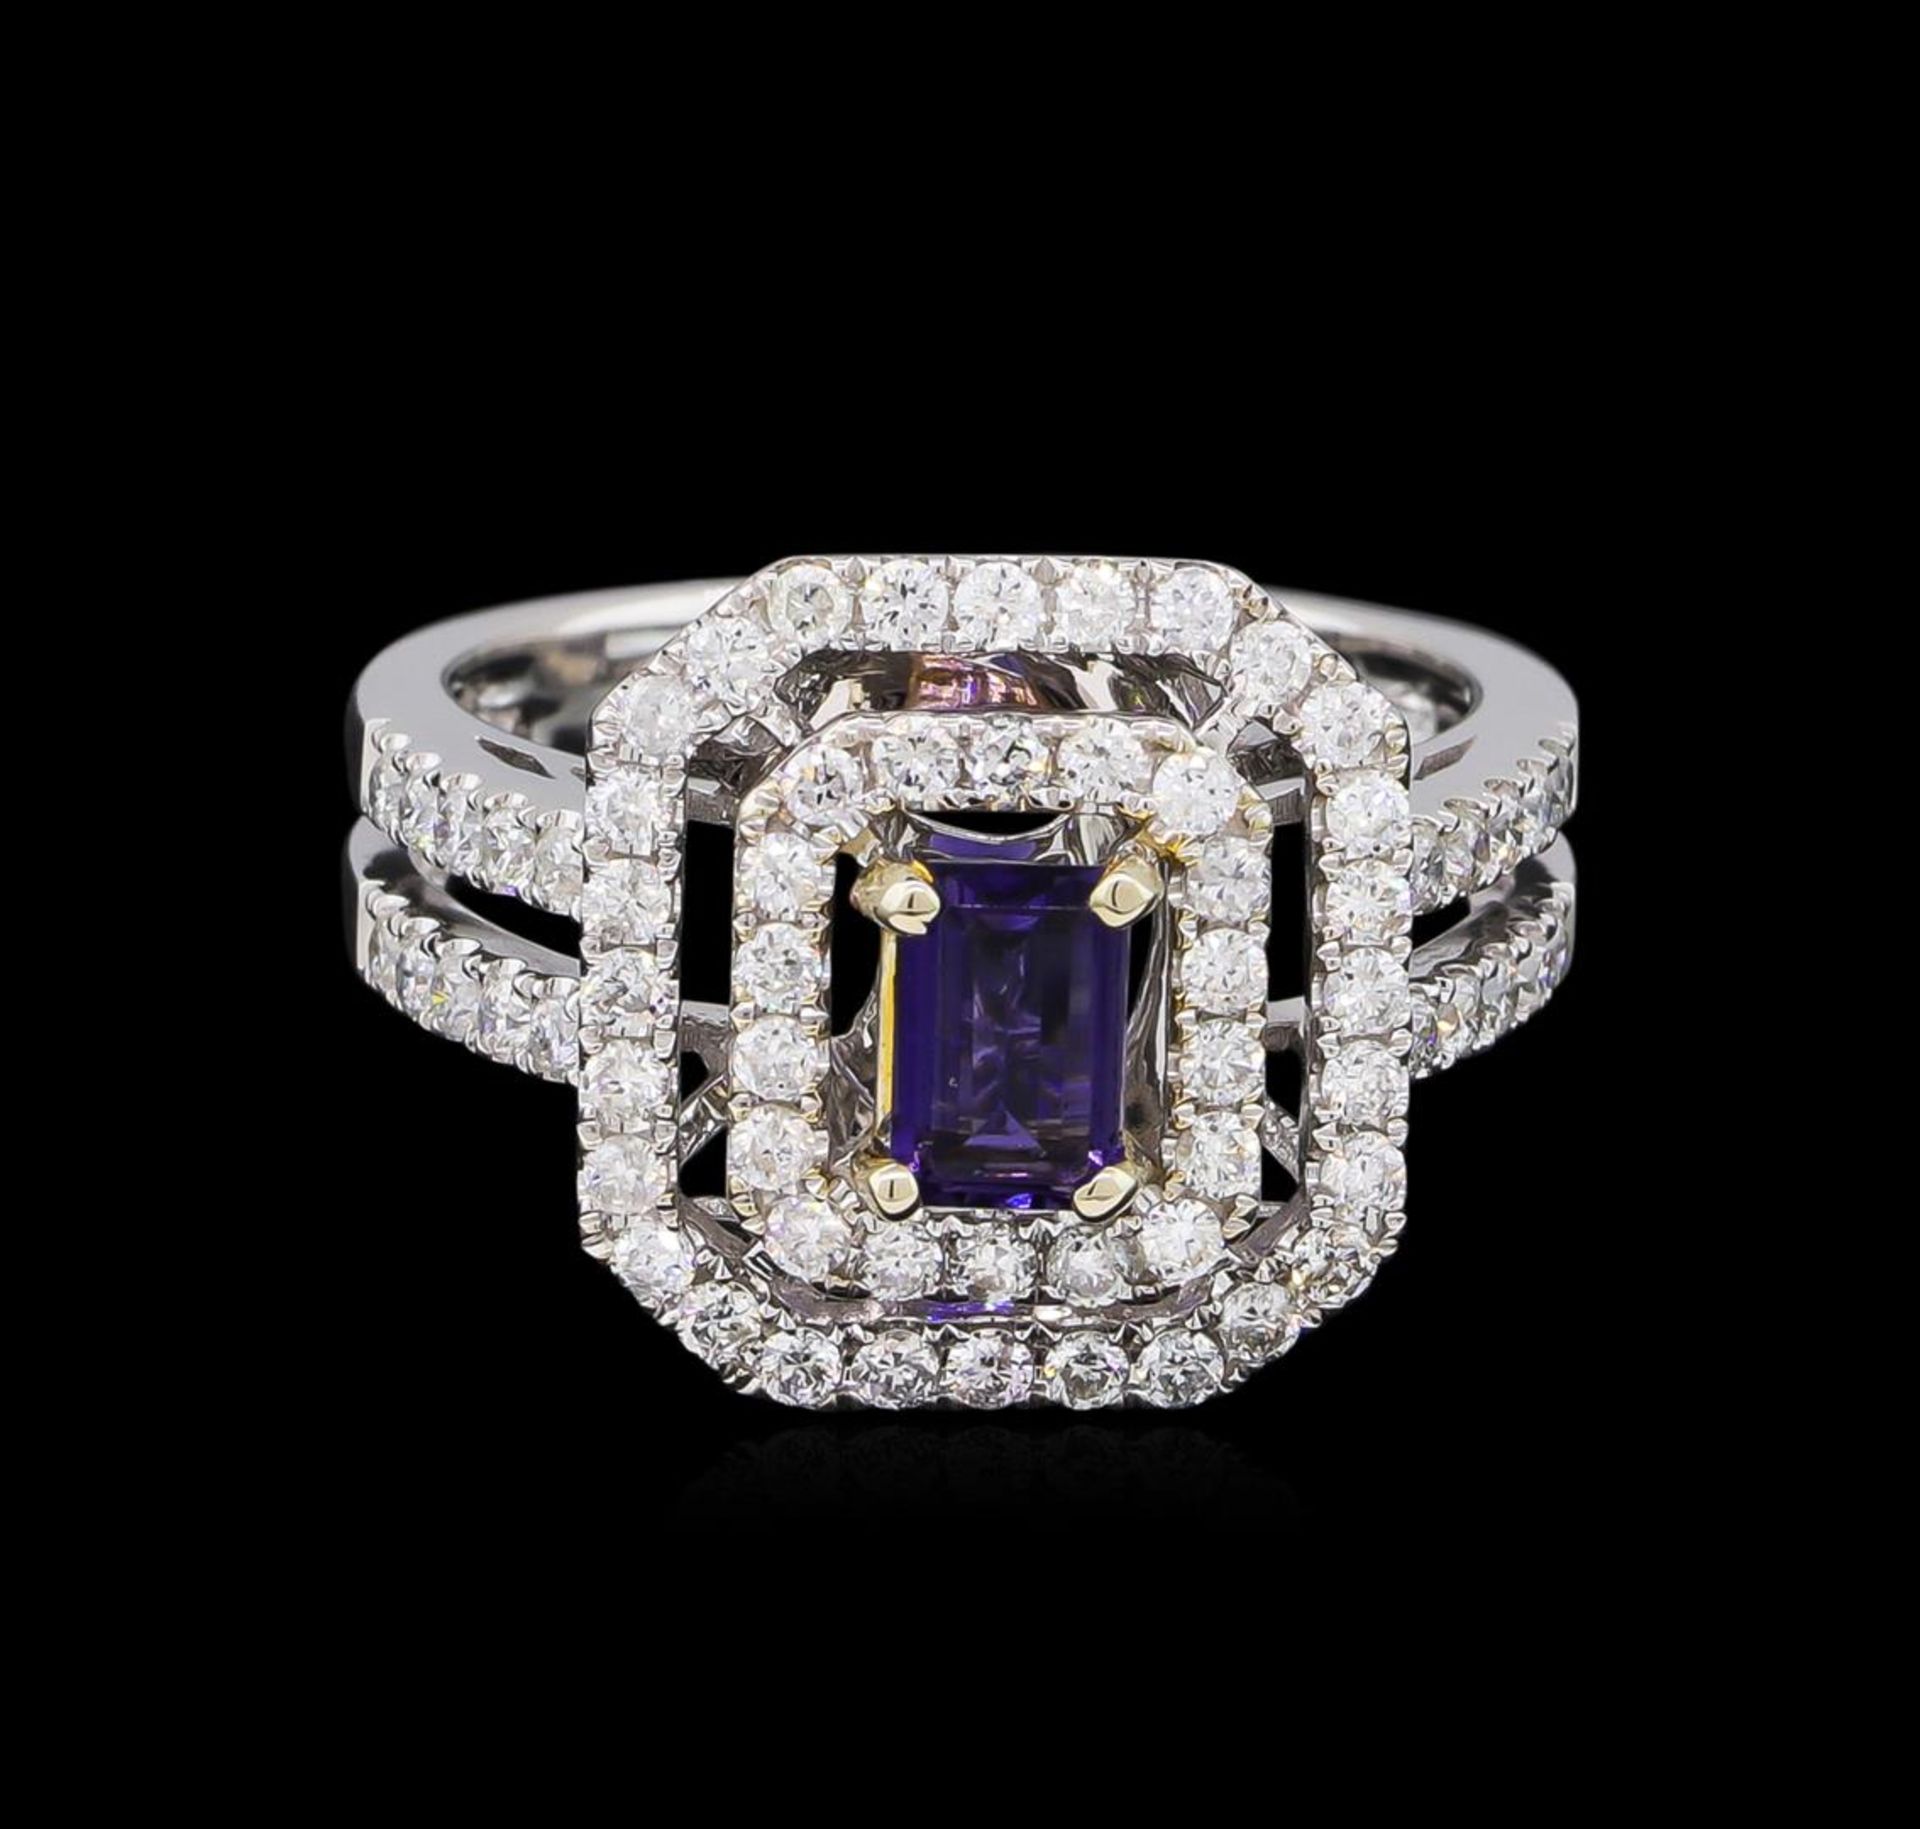 14KT White and Yellow Gold 0.40 ctw Tanzanite and Diamond Ring - Image 2 of 5